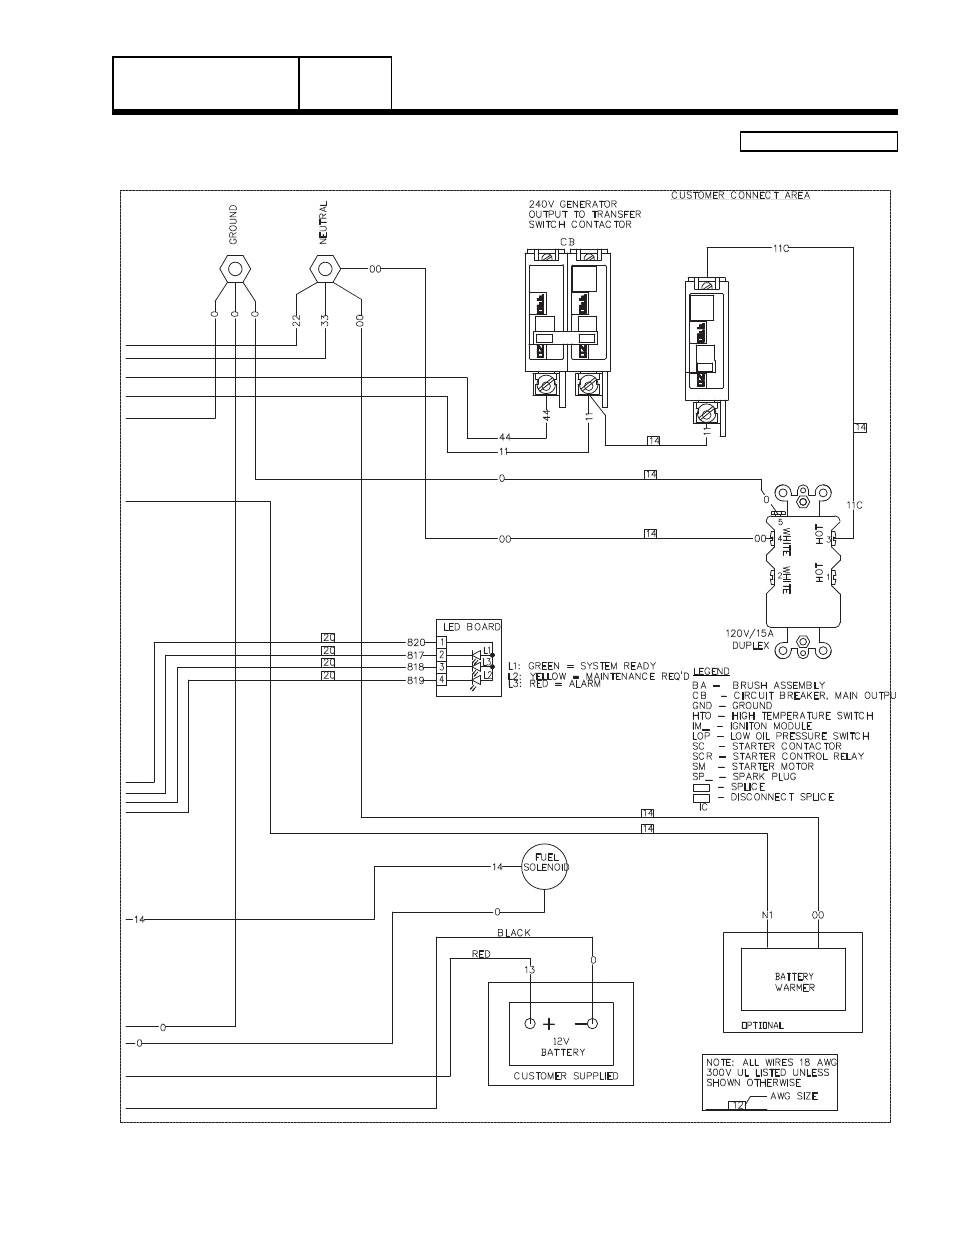 Group g, Wiring diagram, 20 kw home standby part 7, Page 181 | Wiring - diagram | Generac Power Systems 8 kW LP User Manual | Page 183 / 192